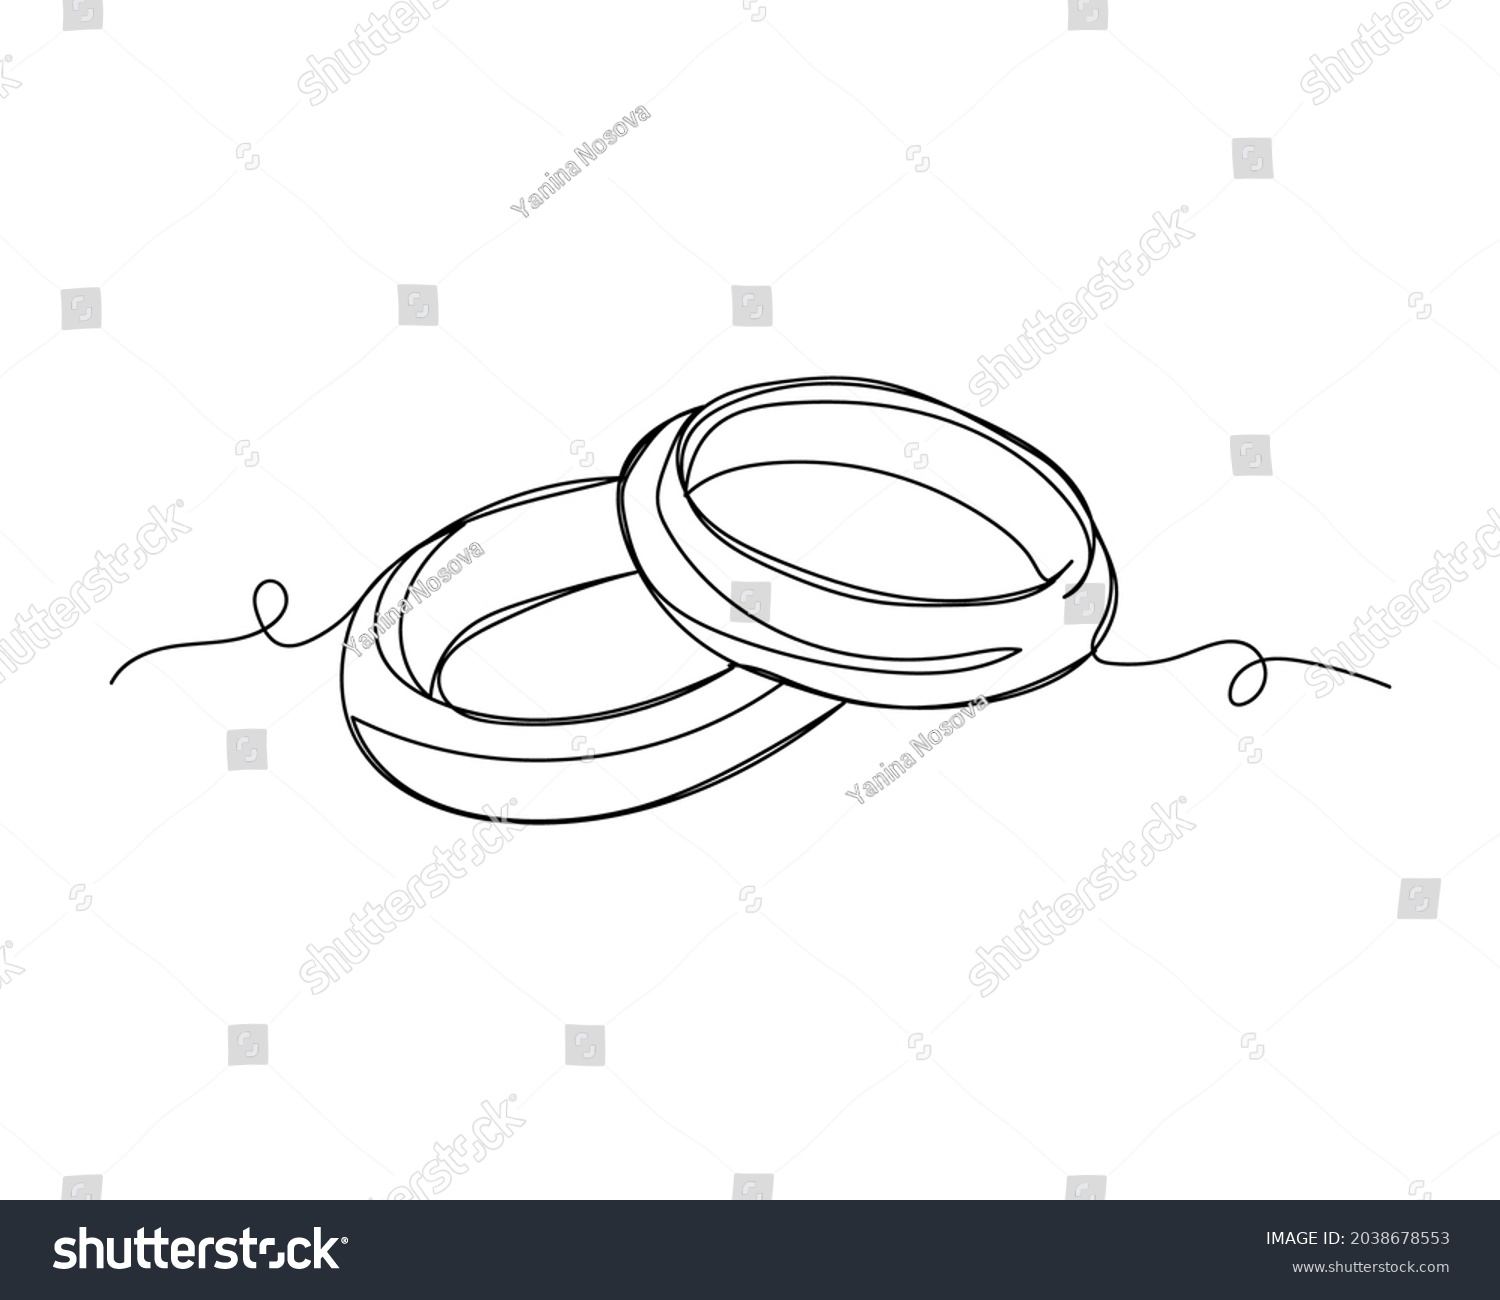 Continuous one line drawing of elegant wedding ring icon in silhouette on a white background. Linear stylized. #2038678553